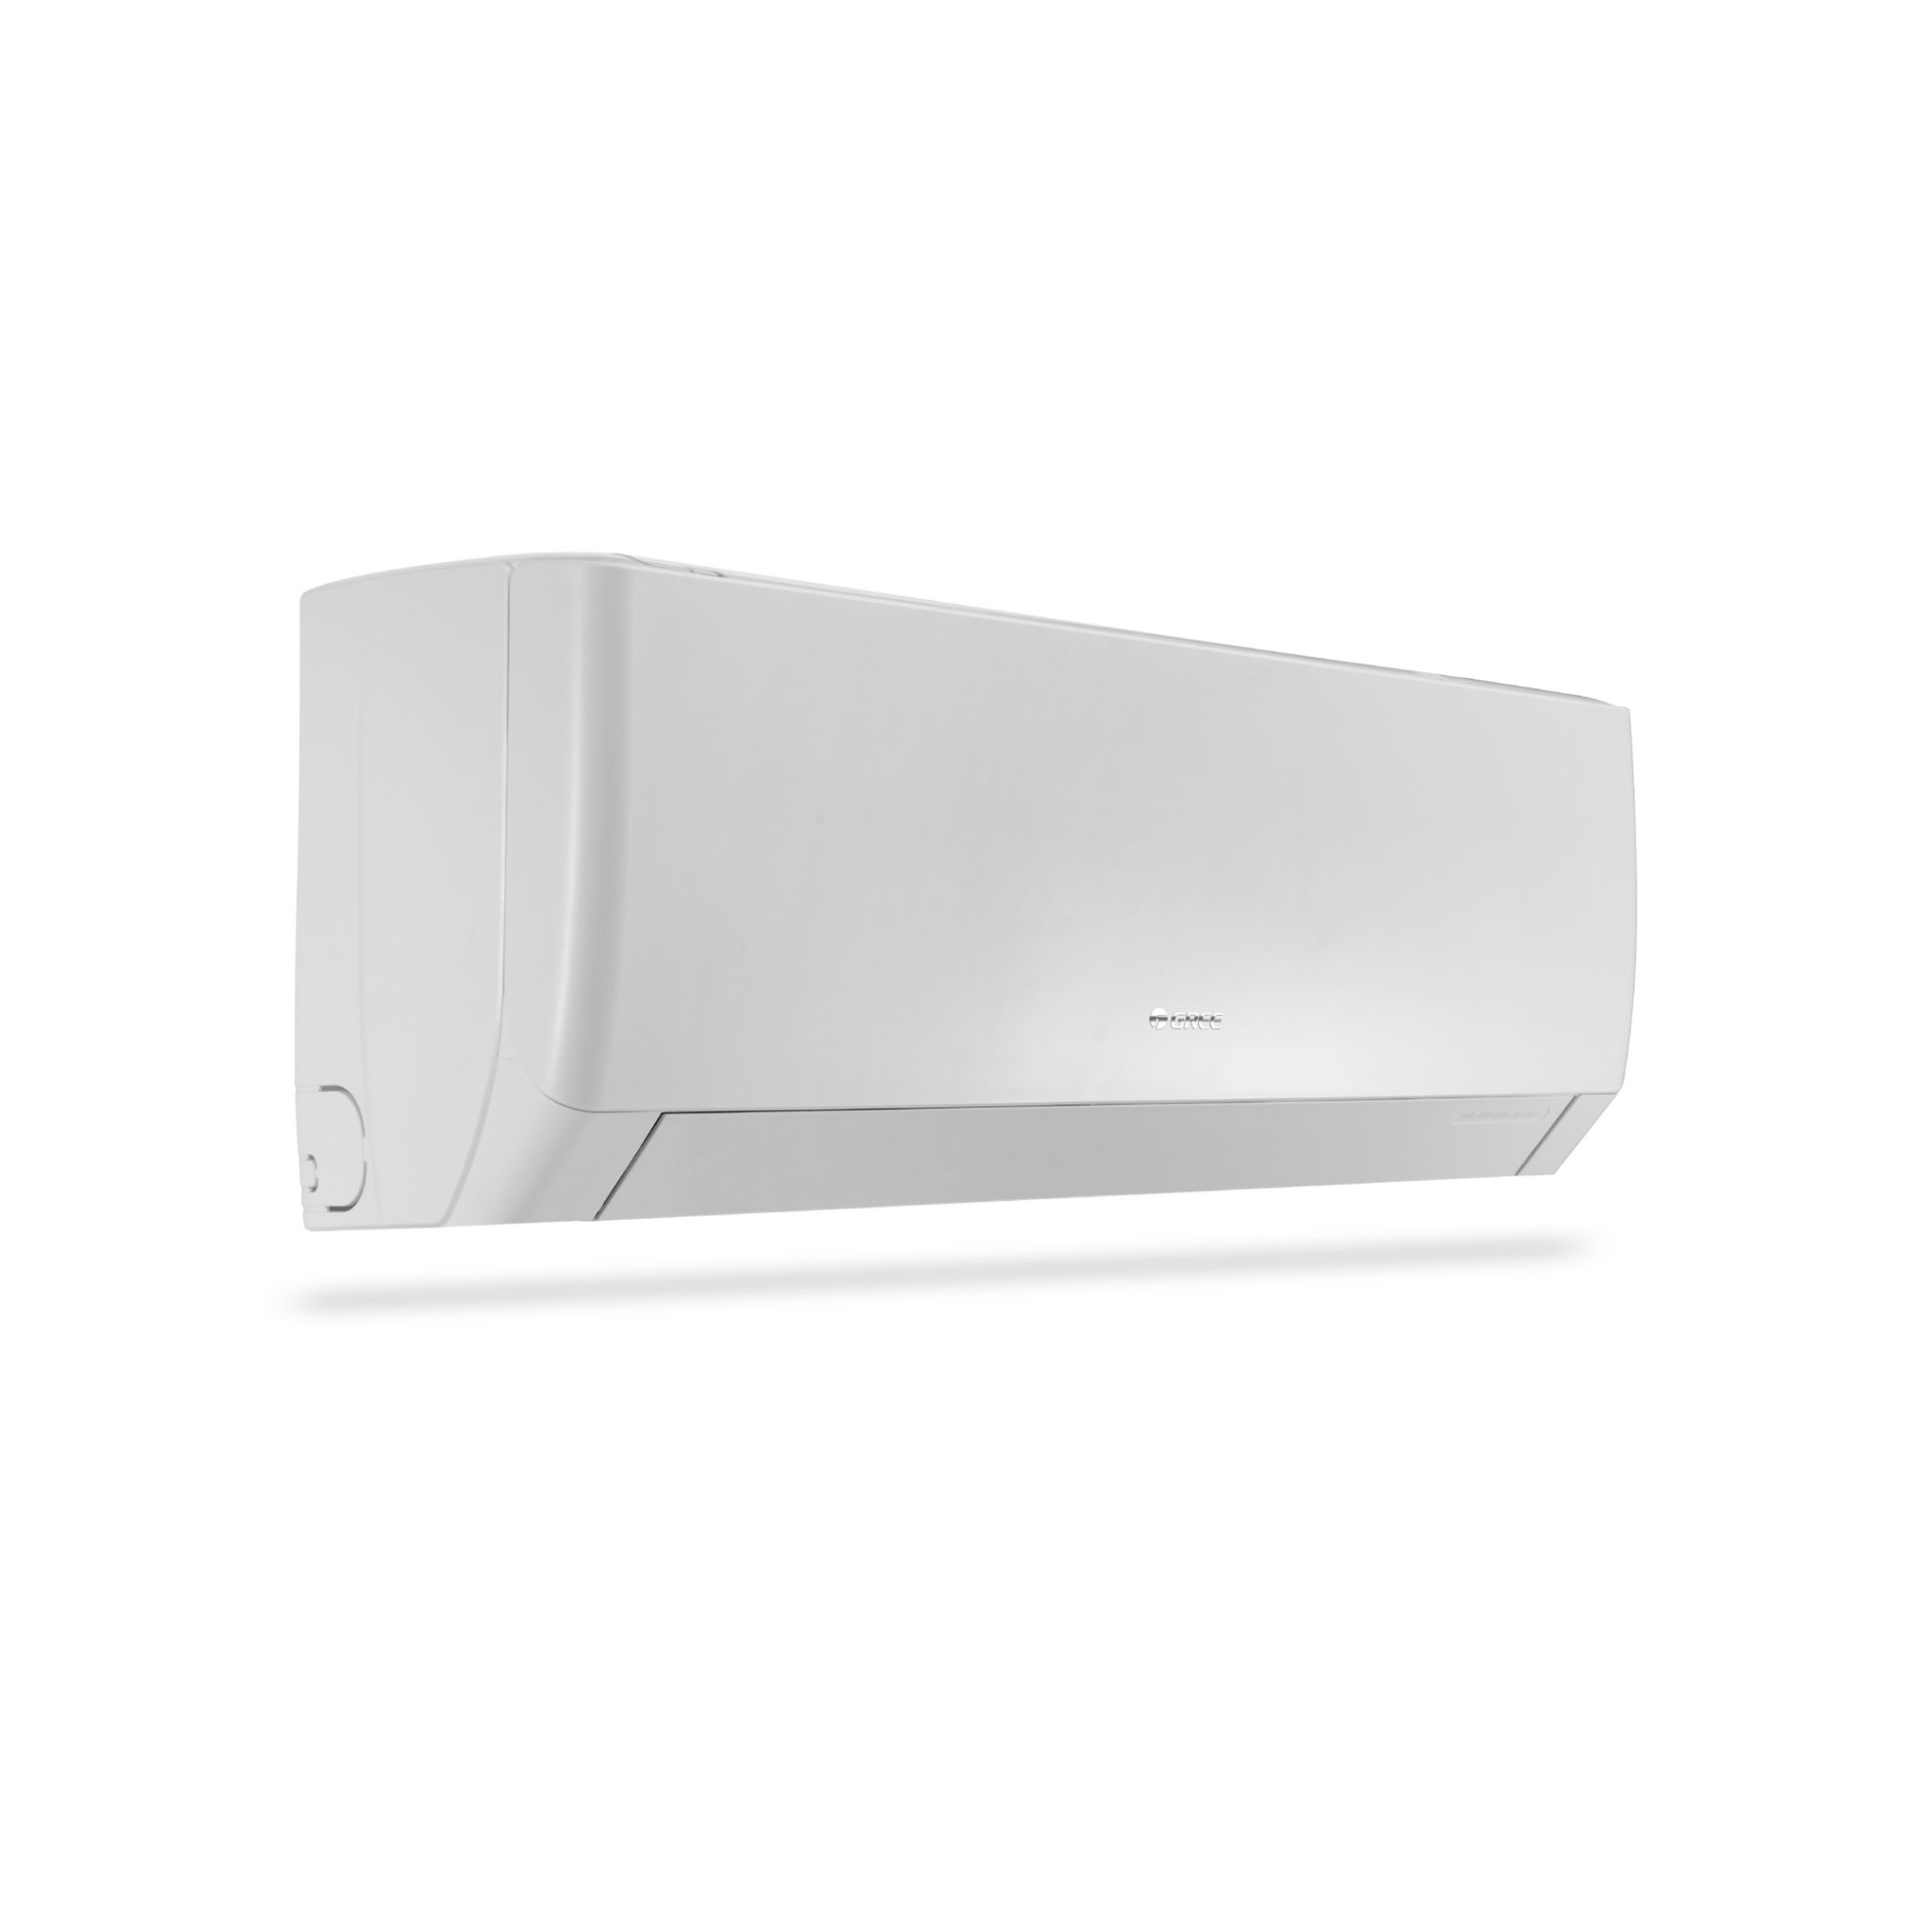 Picture of Gree - PULAR-R24C3 - 2 Ton|Rotary|Wall Split AC